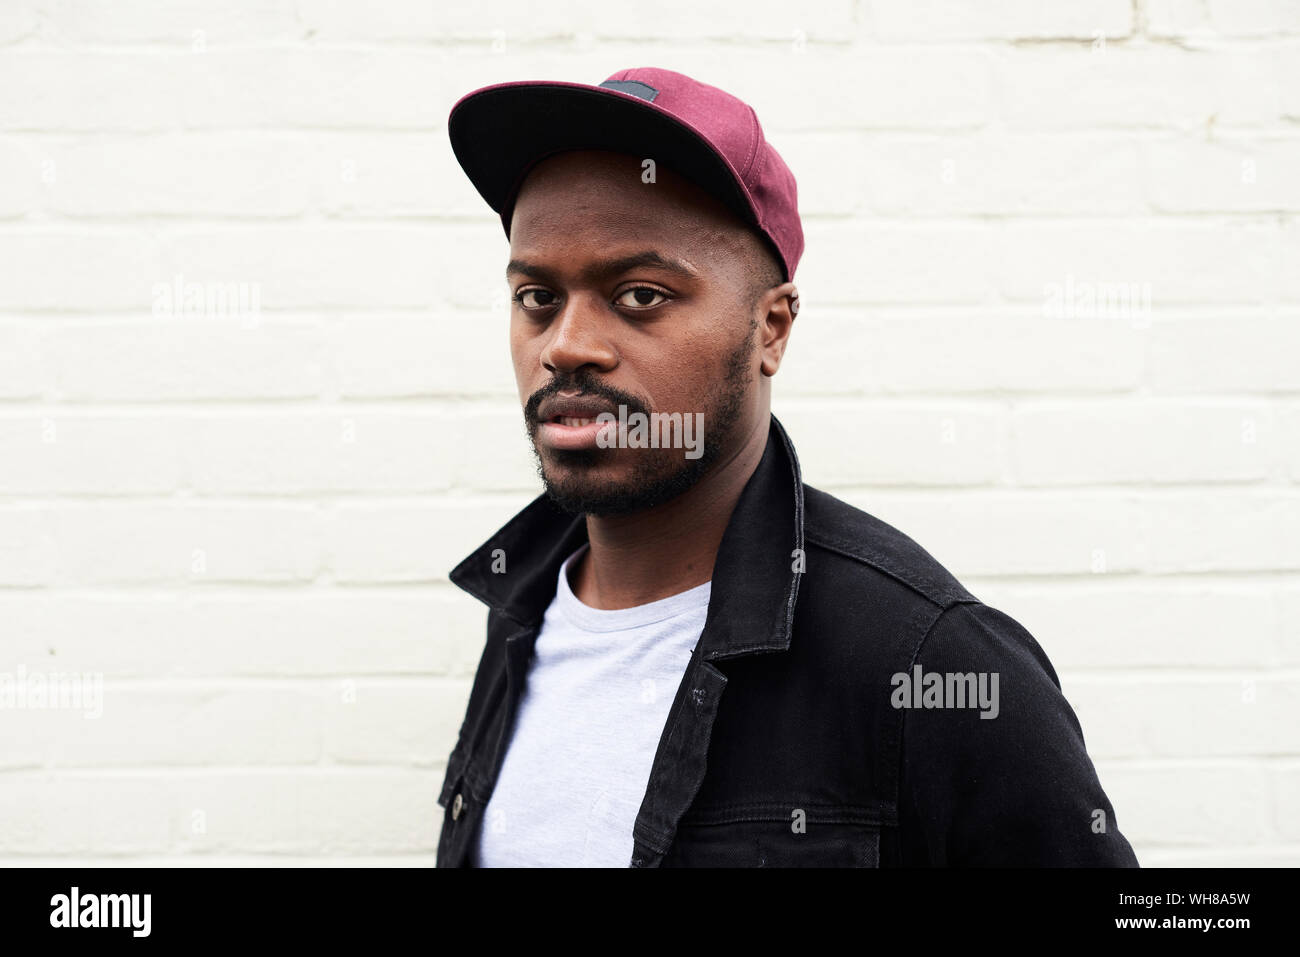 Portrait of mid adult man wearing denim jacket and basecap Stock Photo